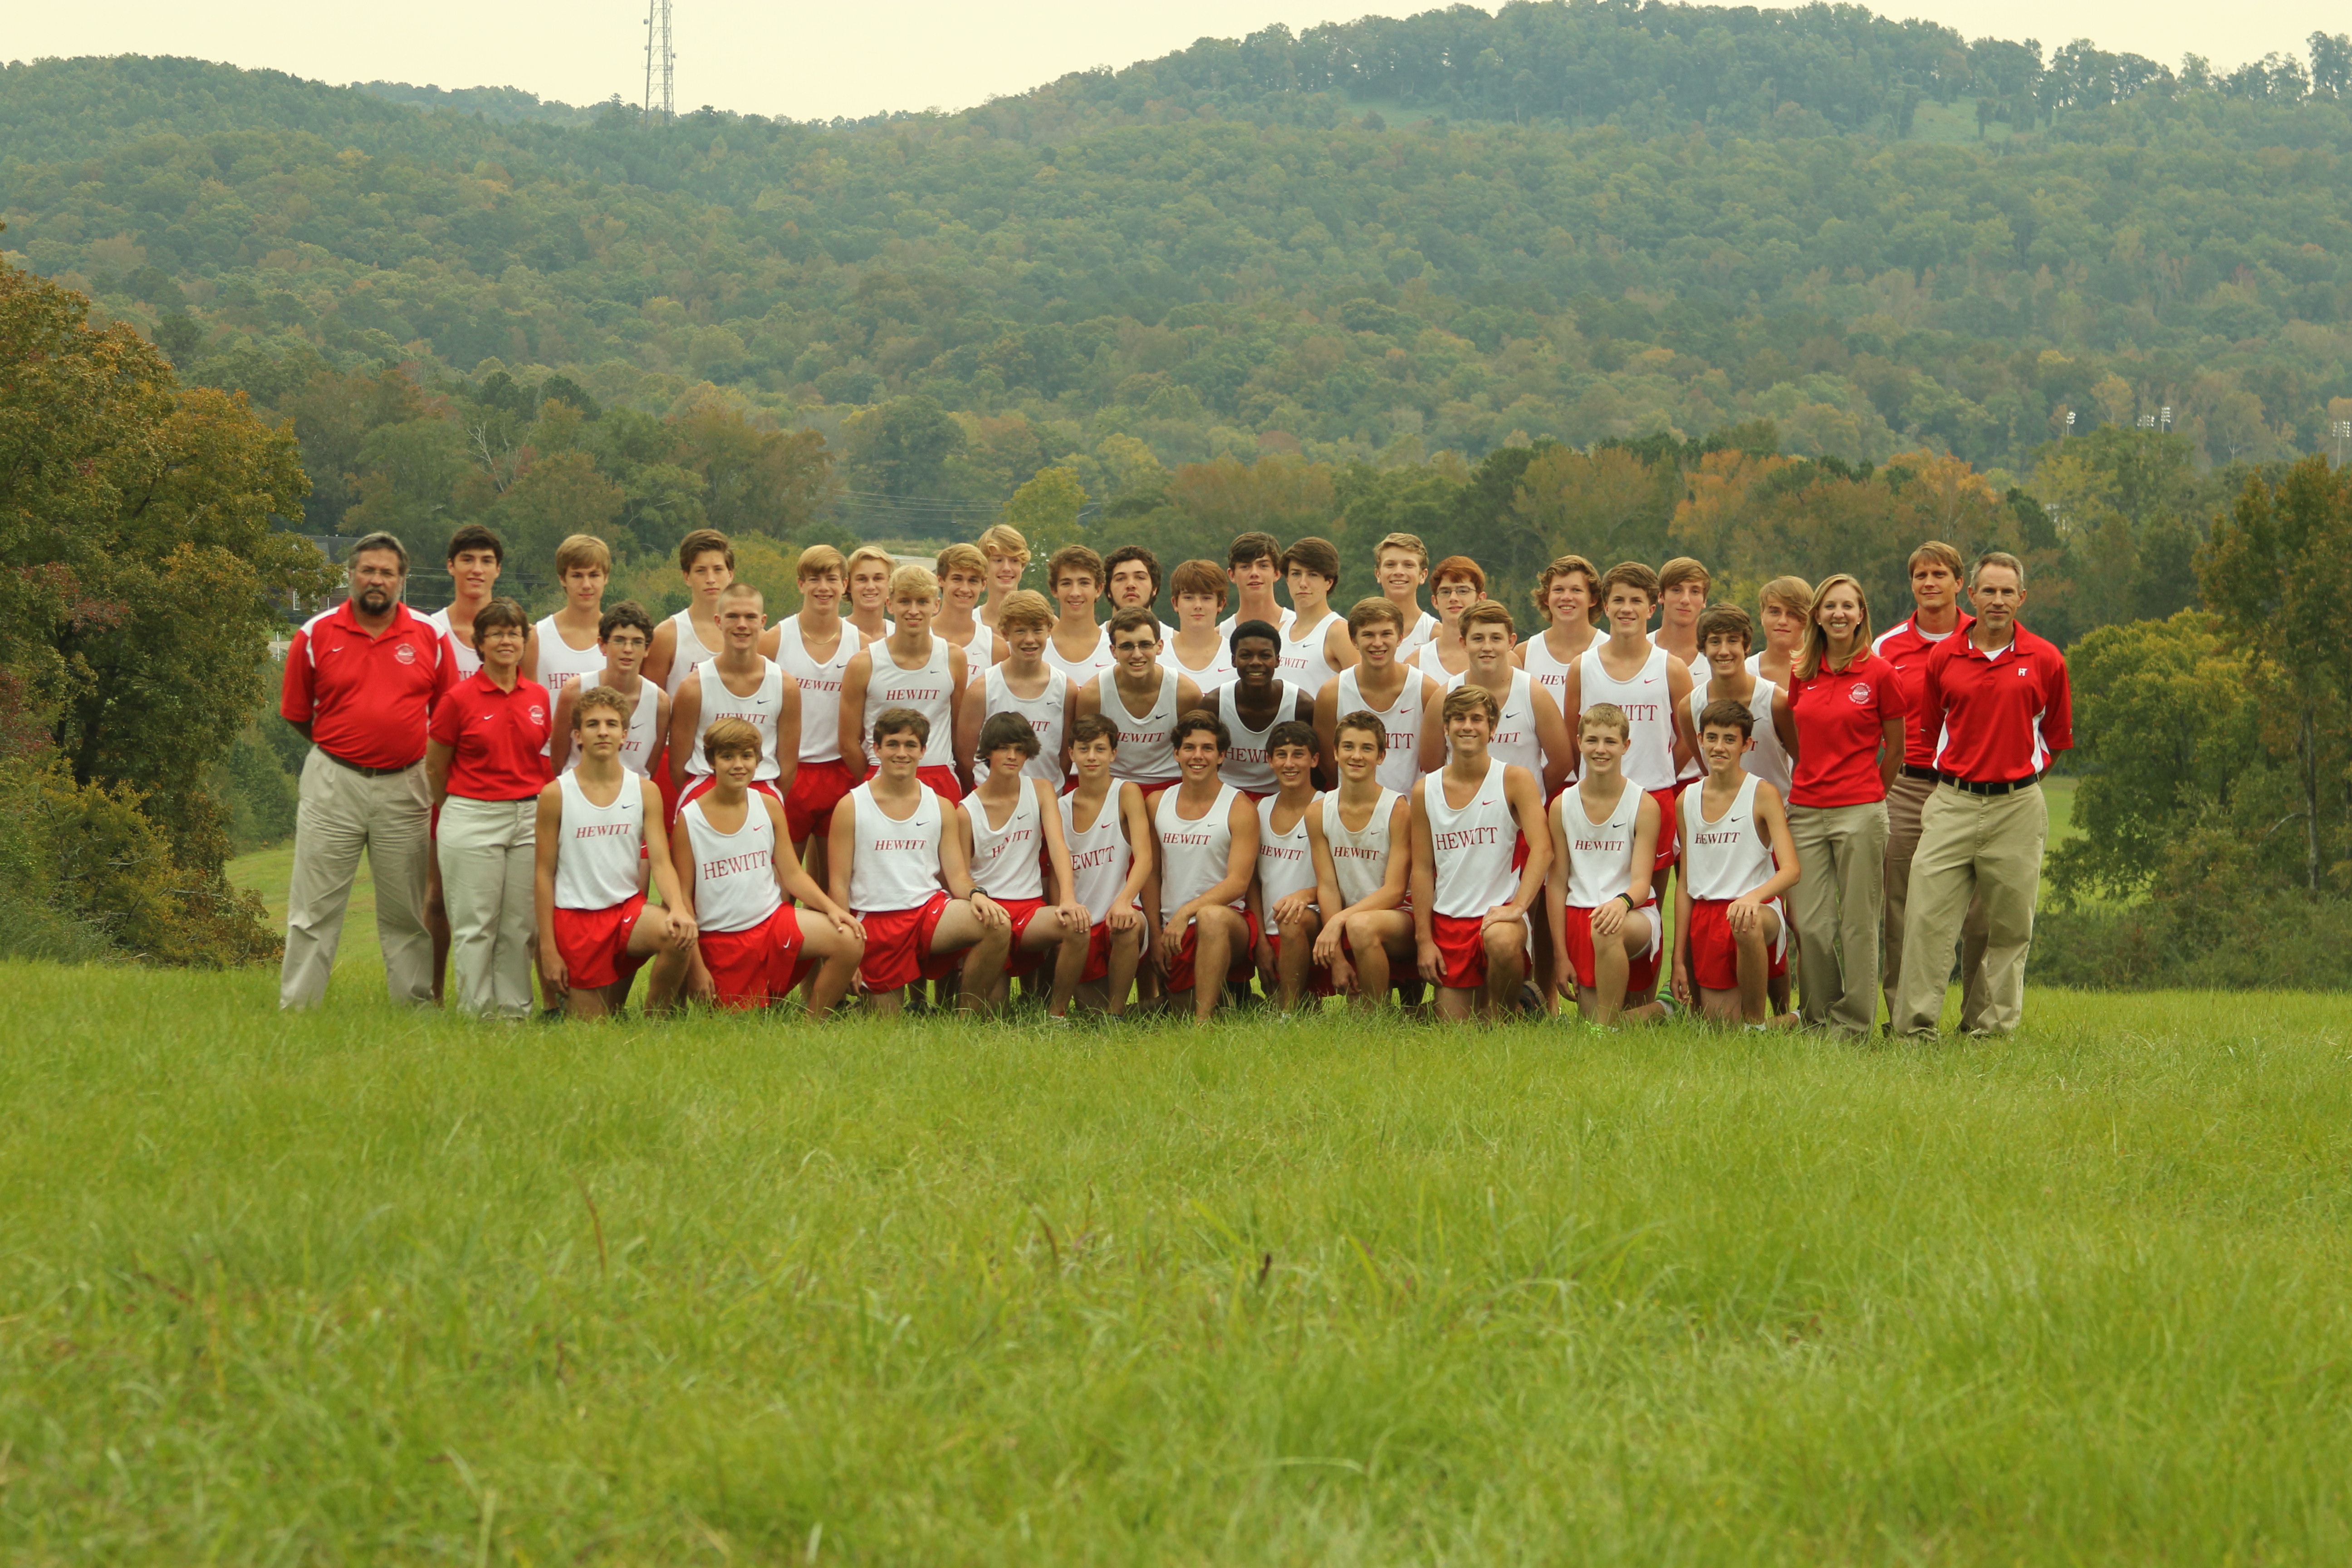 Hewitt Men and Women take 2nd in 6A Cross Country Sectionals, Pinson Men take 3rd in 5A